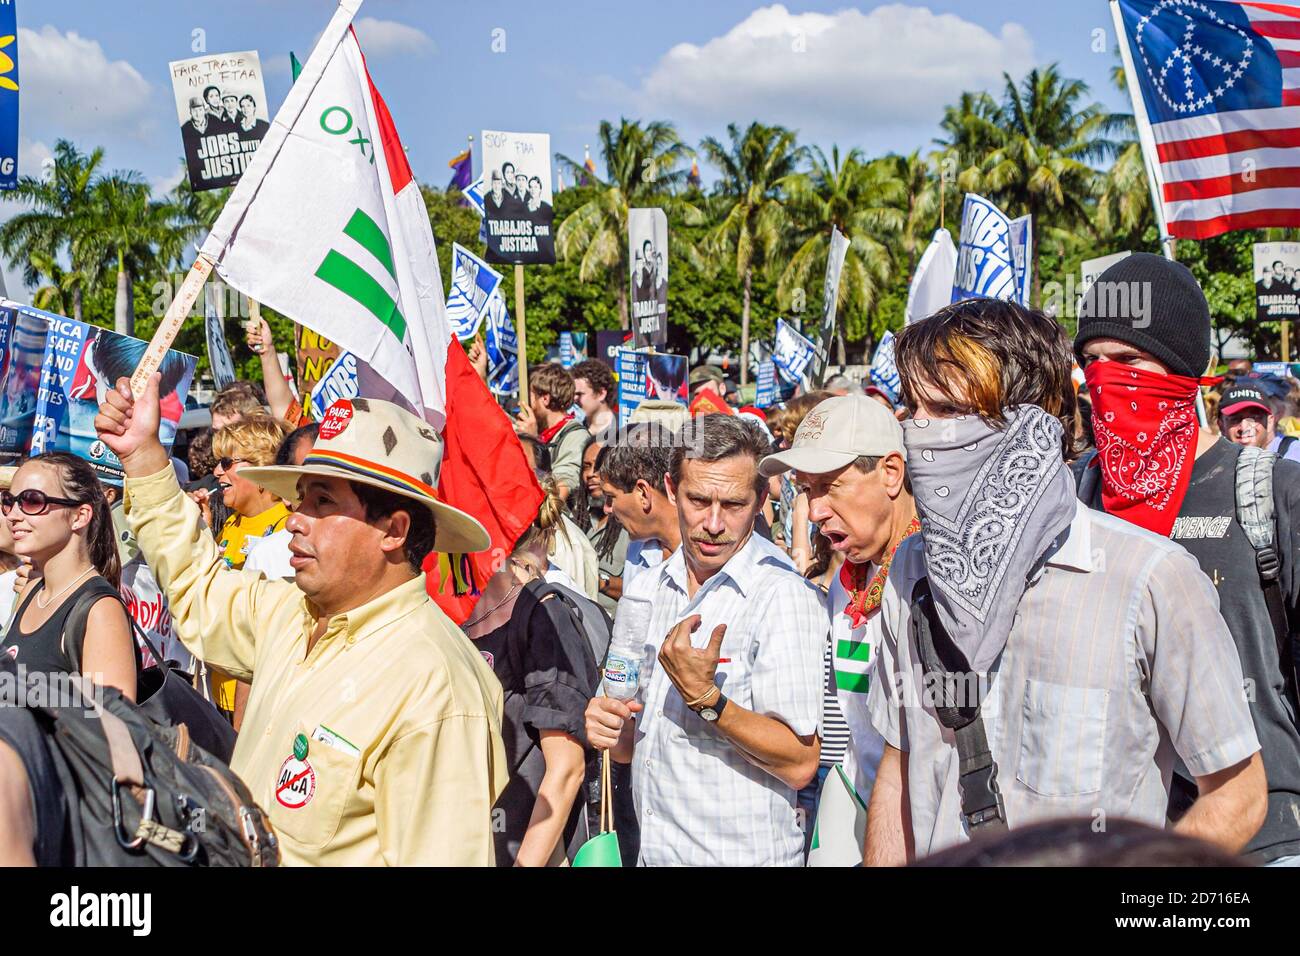 Miami Florida,Biscayne Boulevard,Free Trade Area of Americans Summit FTAA demonstrations,protesters covering face faces covers, Stock Photo